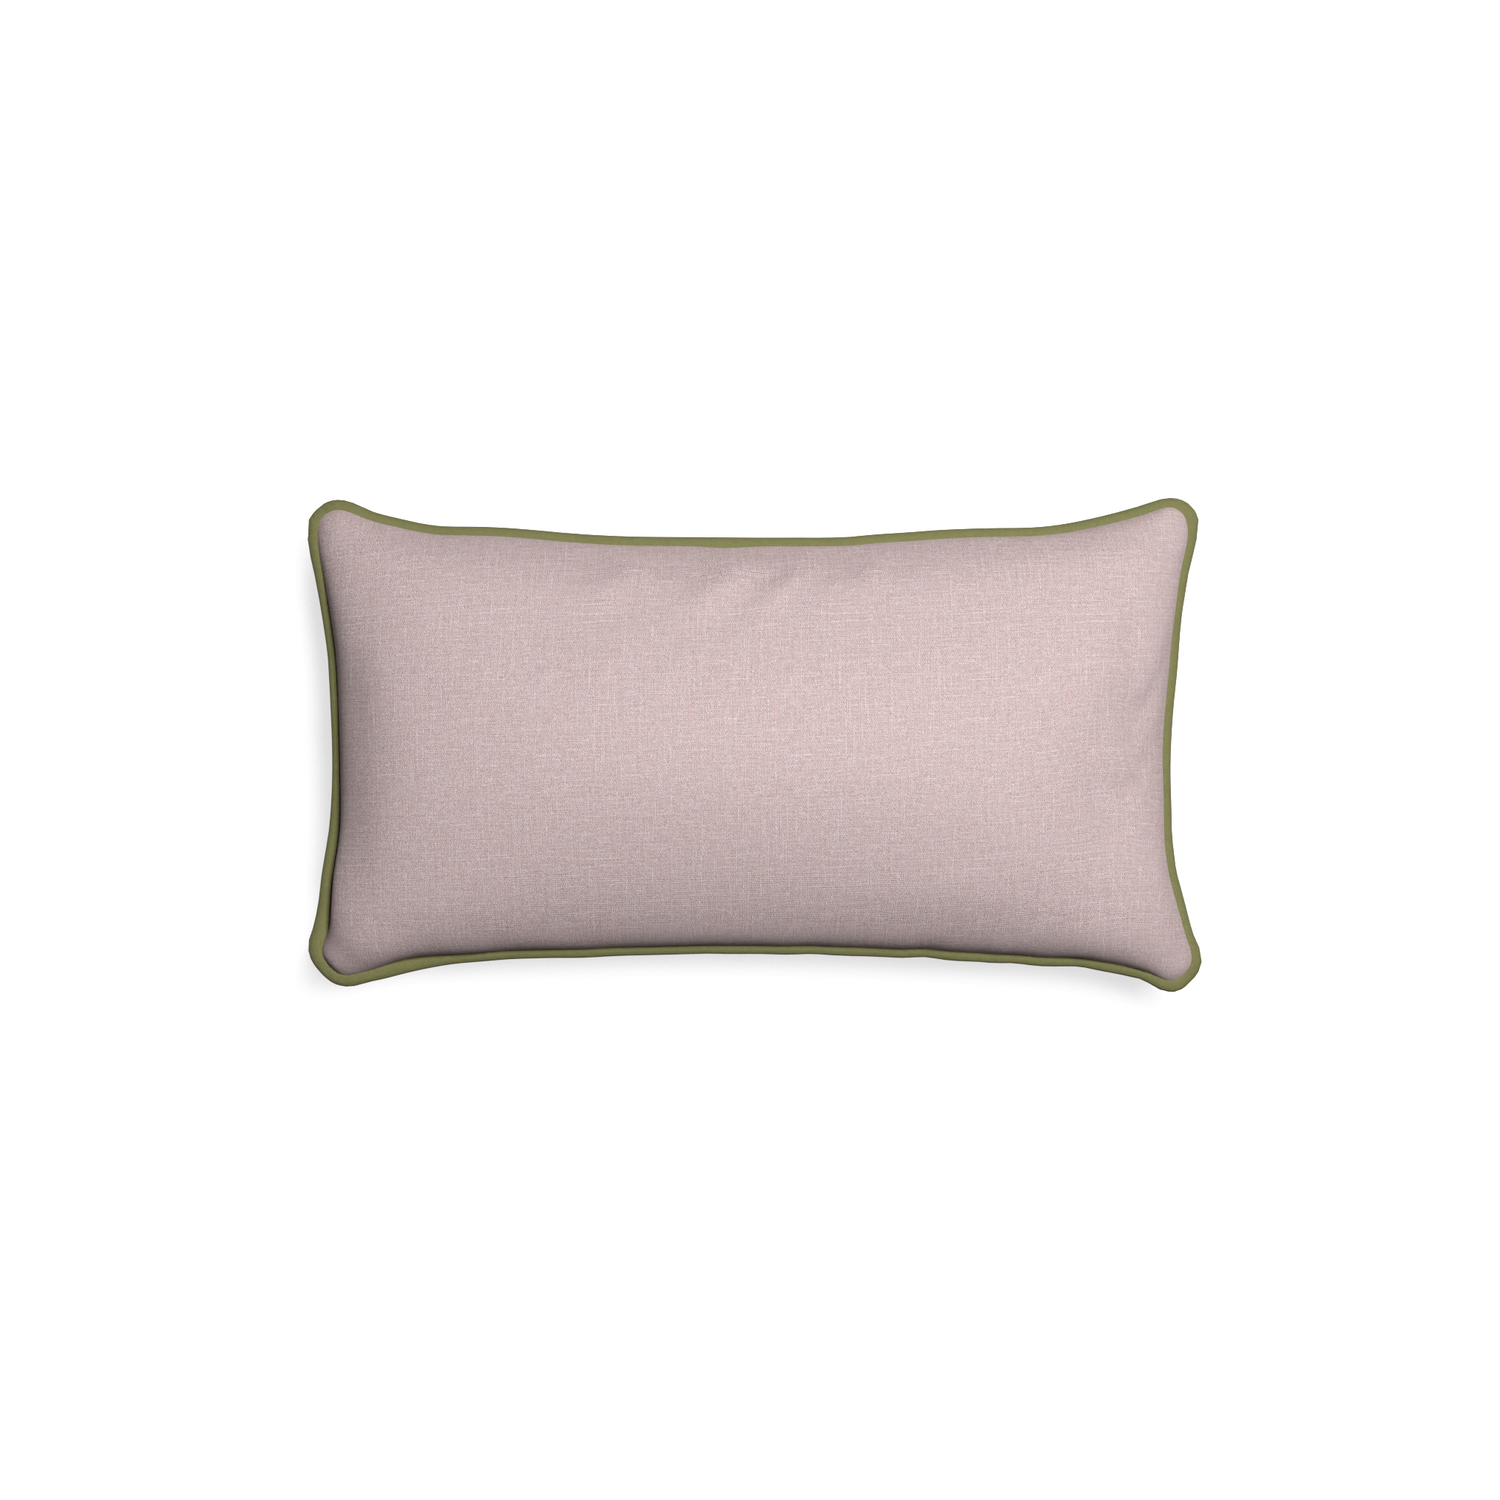 Petite-lumbar orchid custom mauve pinkpillow with moss piping on white background